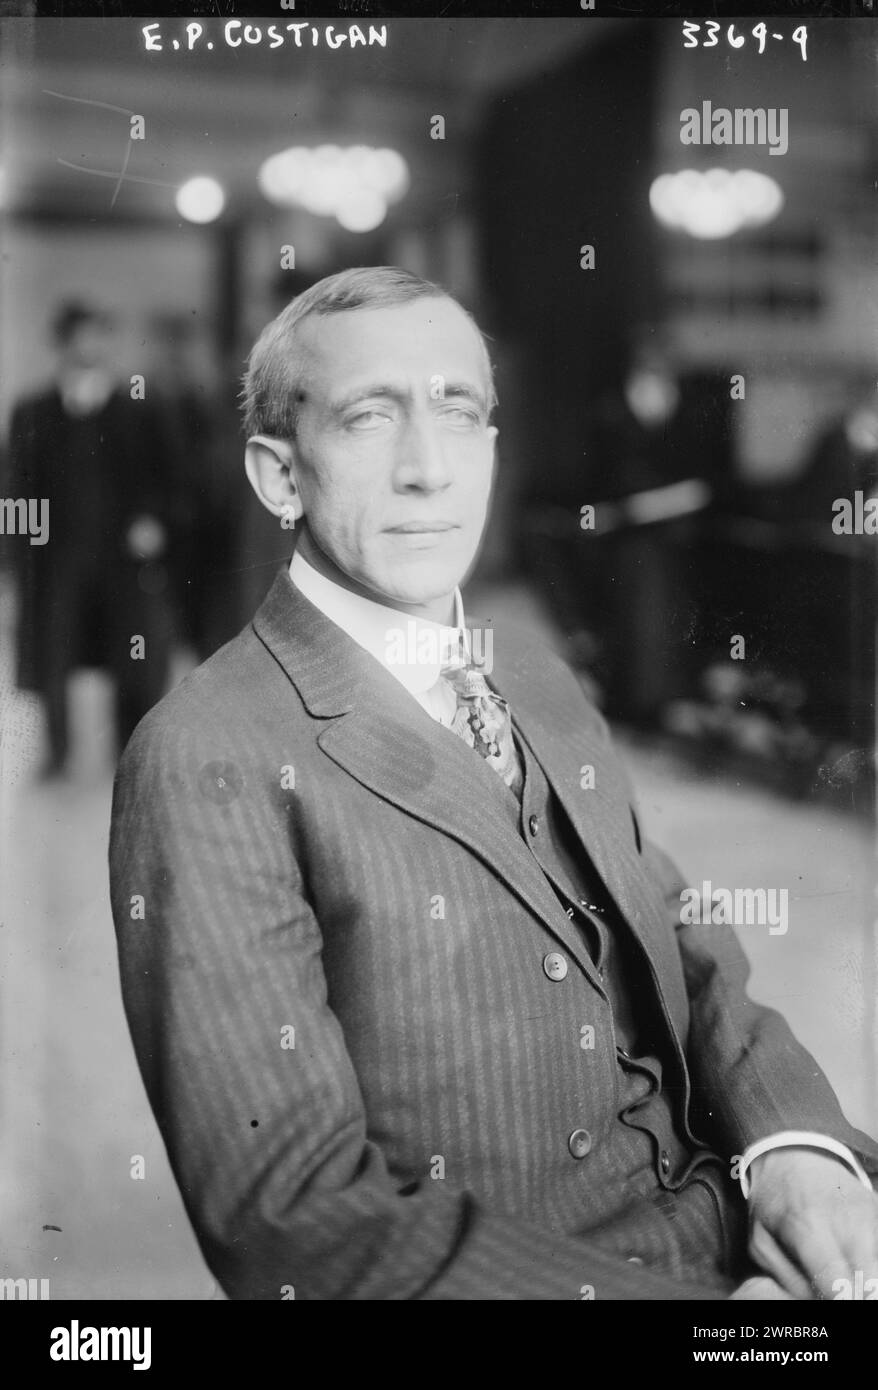 E.P. Costigan, Photograph shows Edward Prentiss Costigan (1874-1939) who was a founder of the Progressive Party in Colorado and Colorado Senator from 1931 to 1937. Costigan testified at the 1915 hearings of the federal Commission on Industrial Relations at New York City Hall, New York City., 1915 Feb. 3, Glass negatives, 1 negative: glass Stock Photo